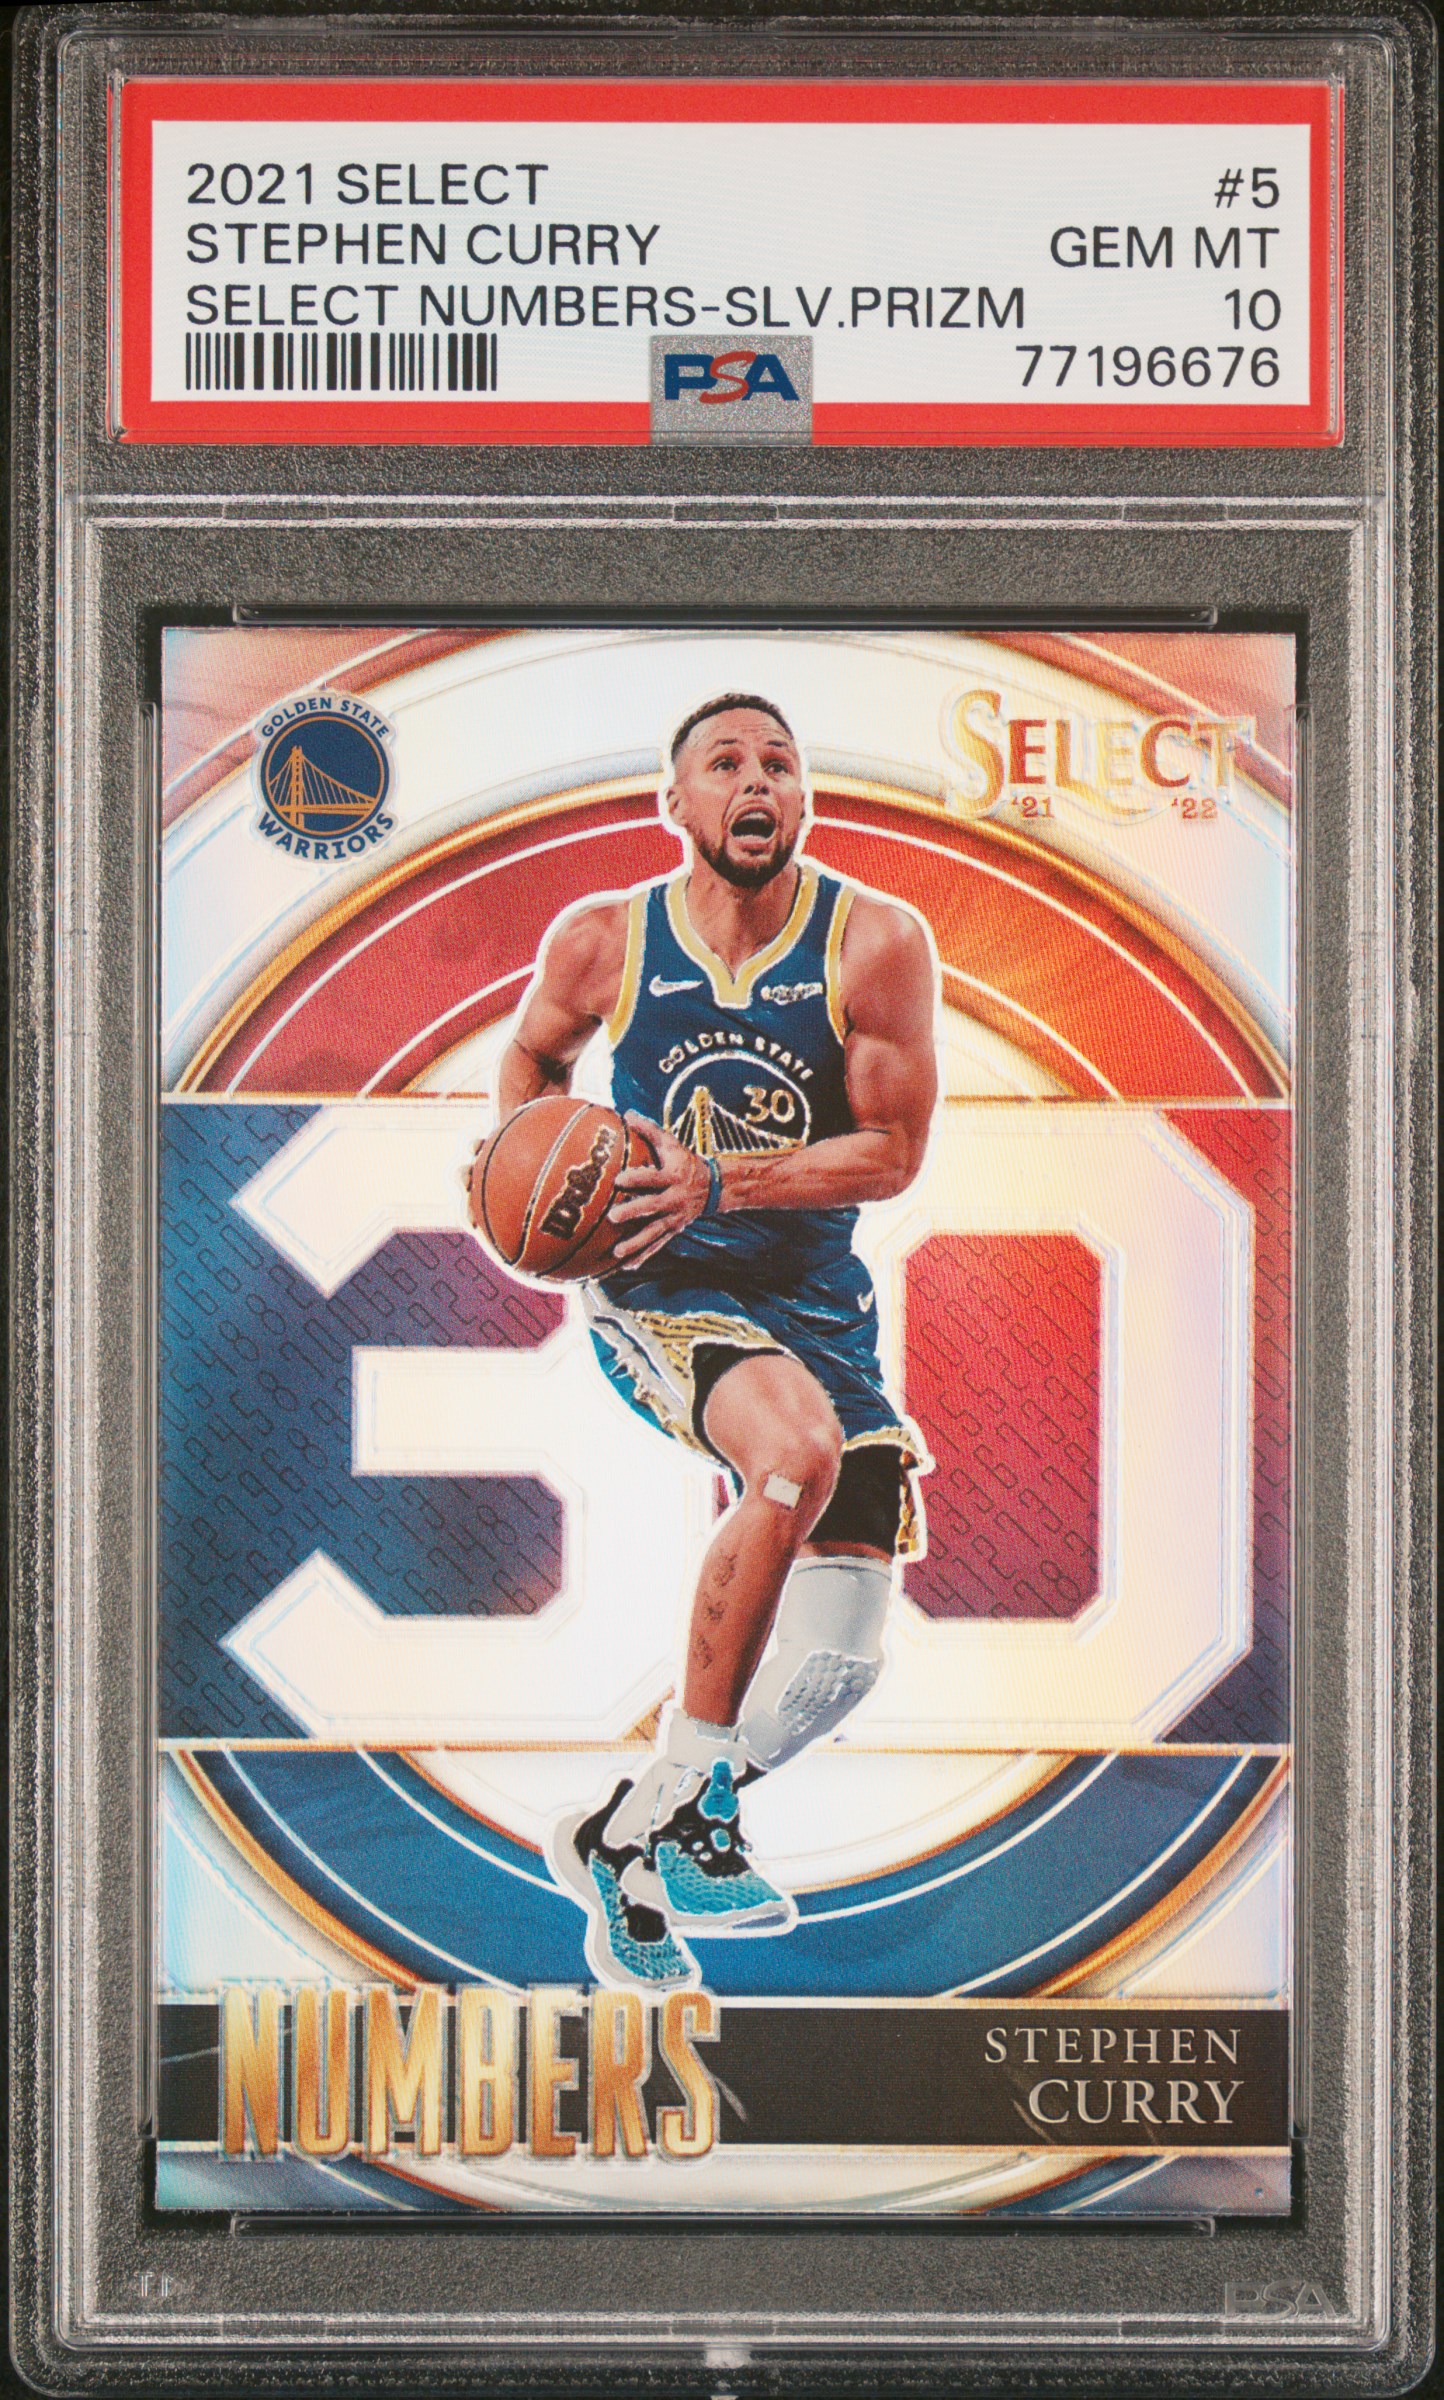 2021 Panini Select Select Numbers #5 Stephen Curry – PSA GEM MT 10